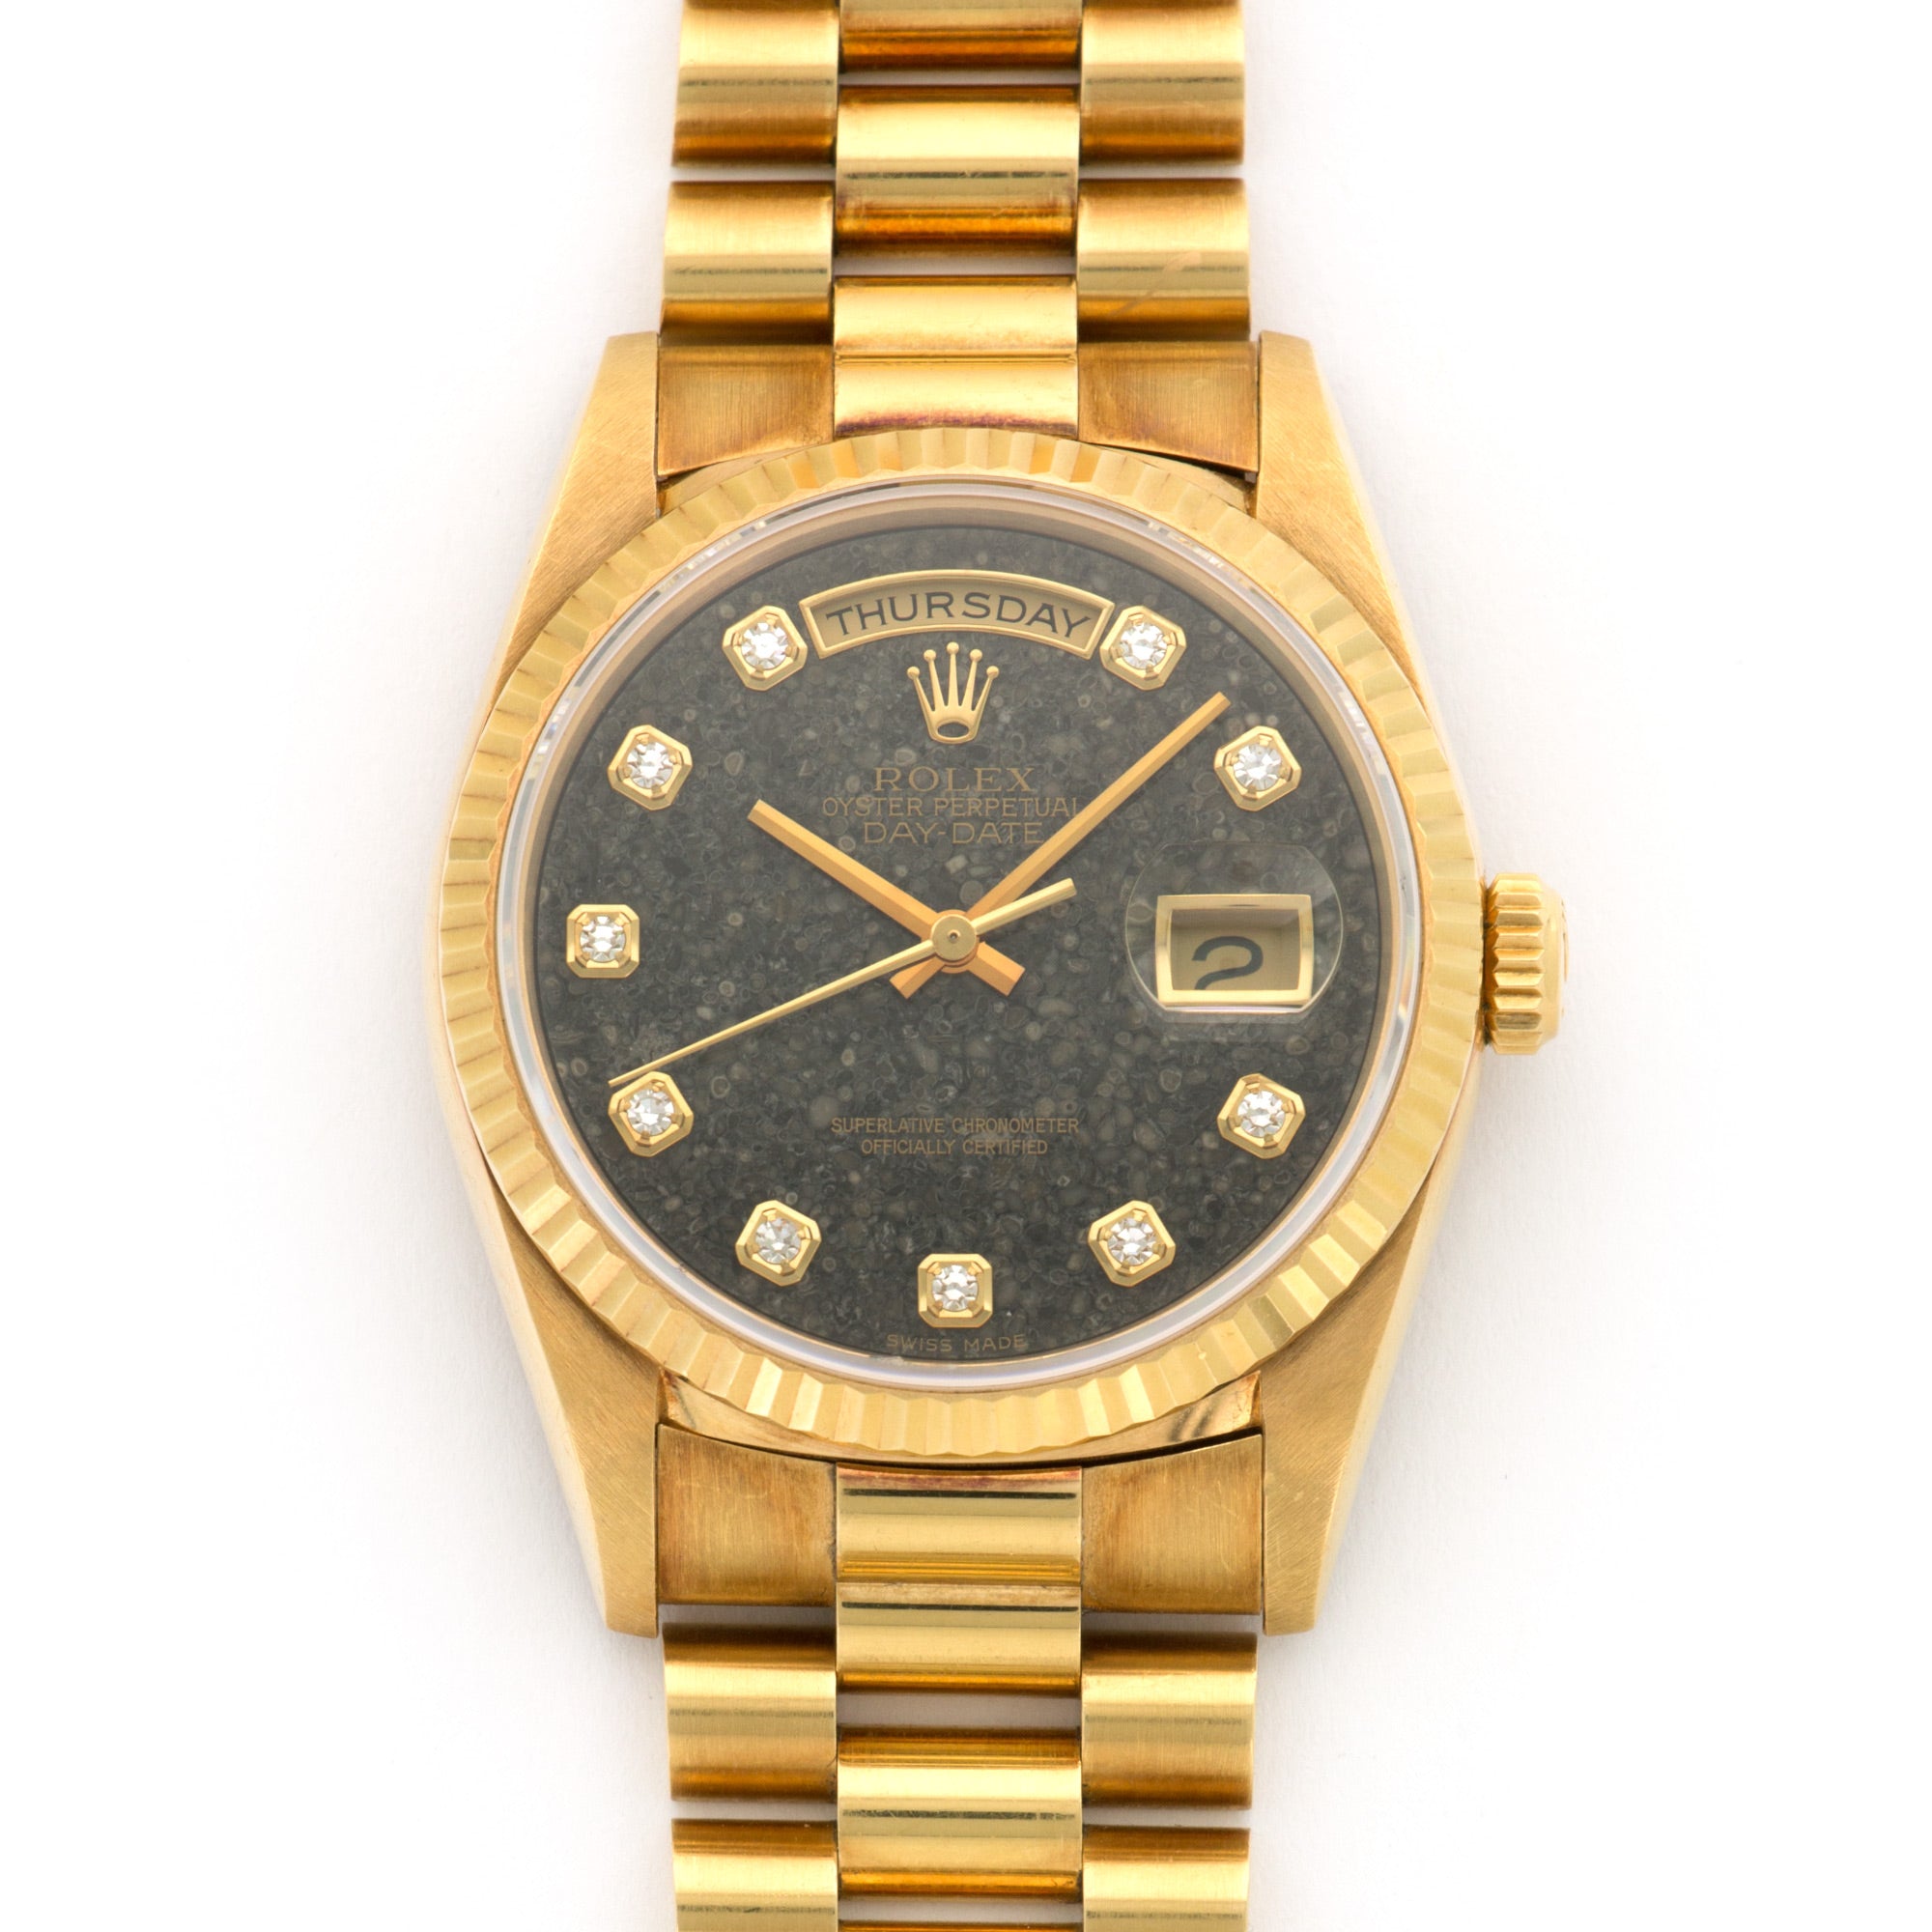 Rolex - Rolex Yellow Gold Jurassic Day-Date Fossil Dial Watch Ref. 18238 - The Keystone Watches